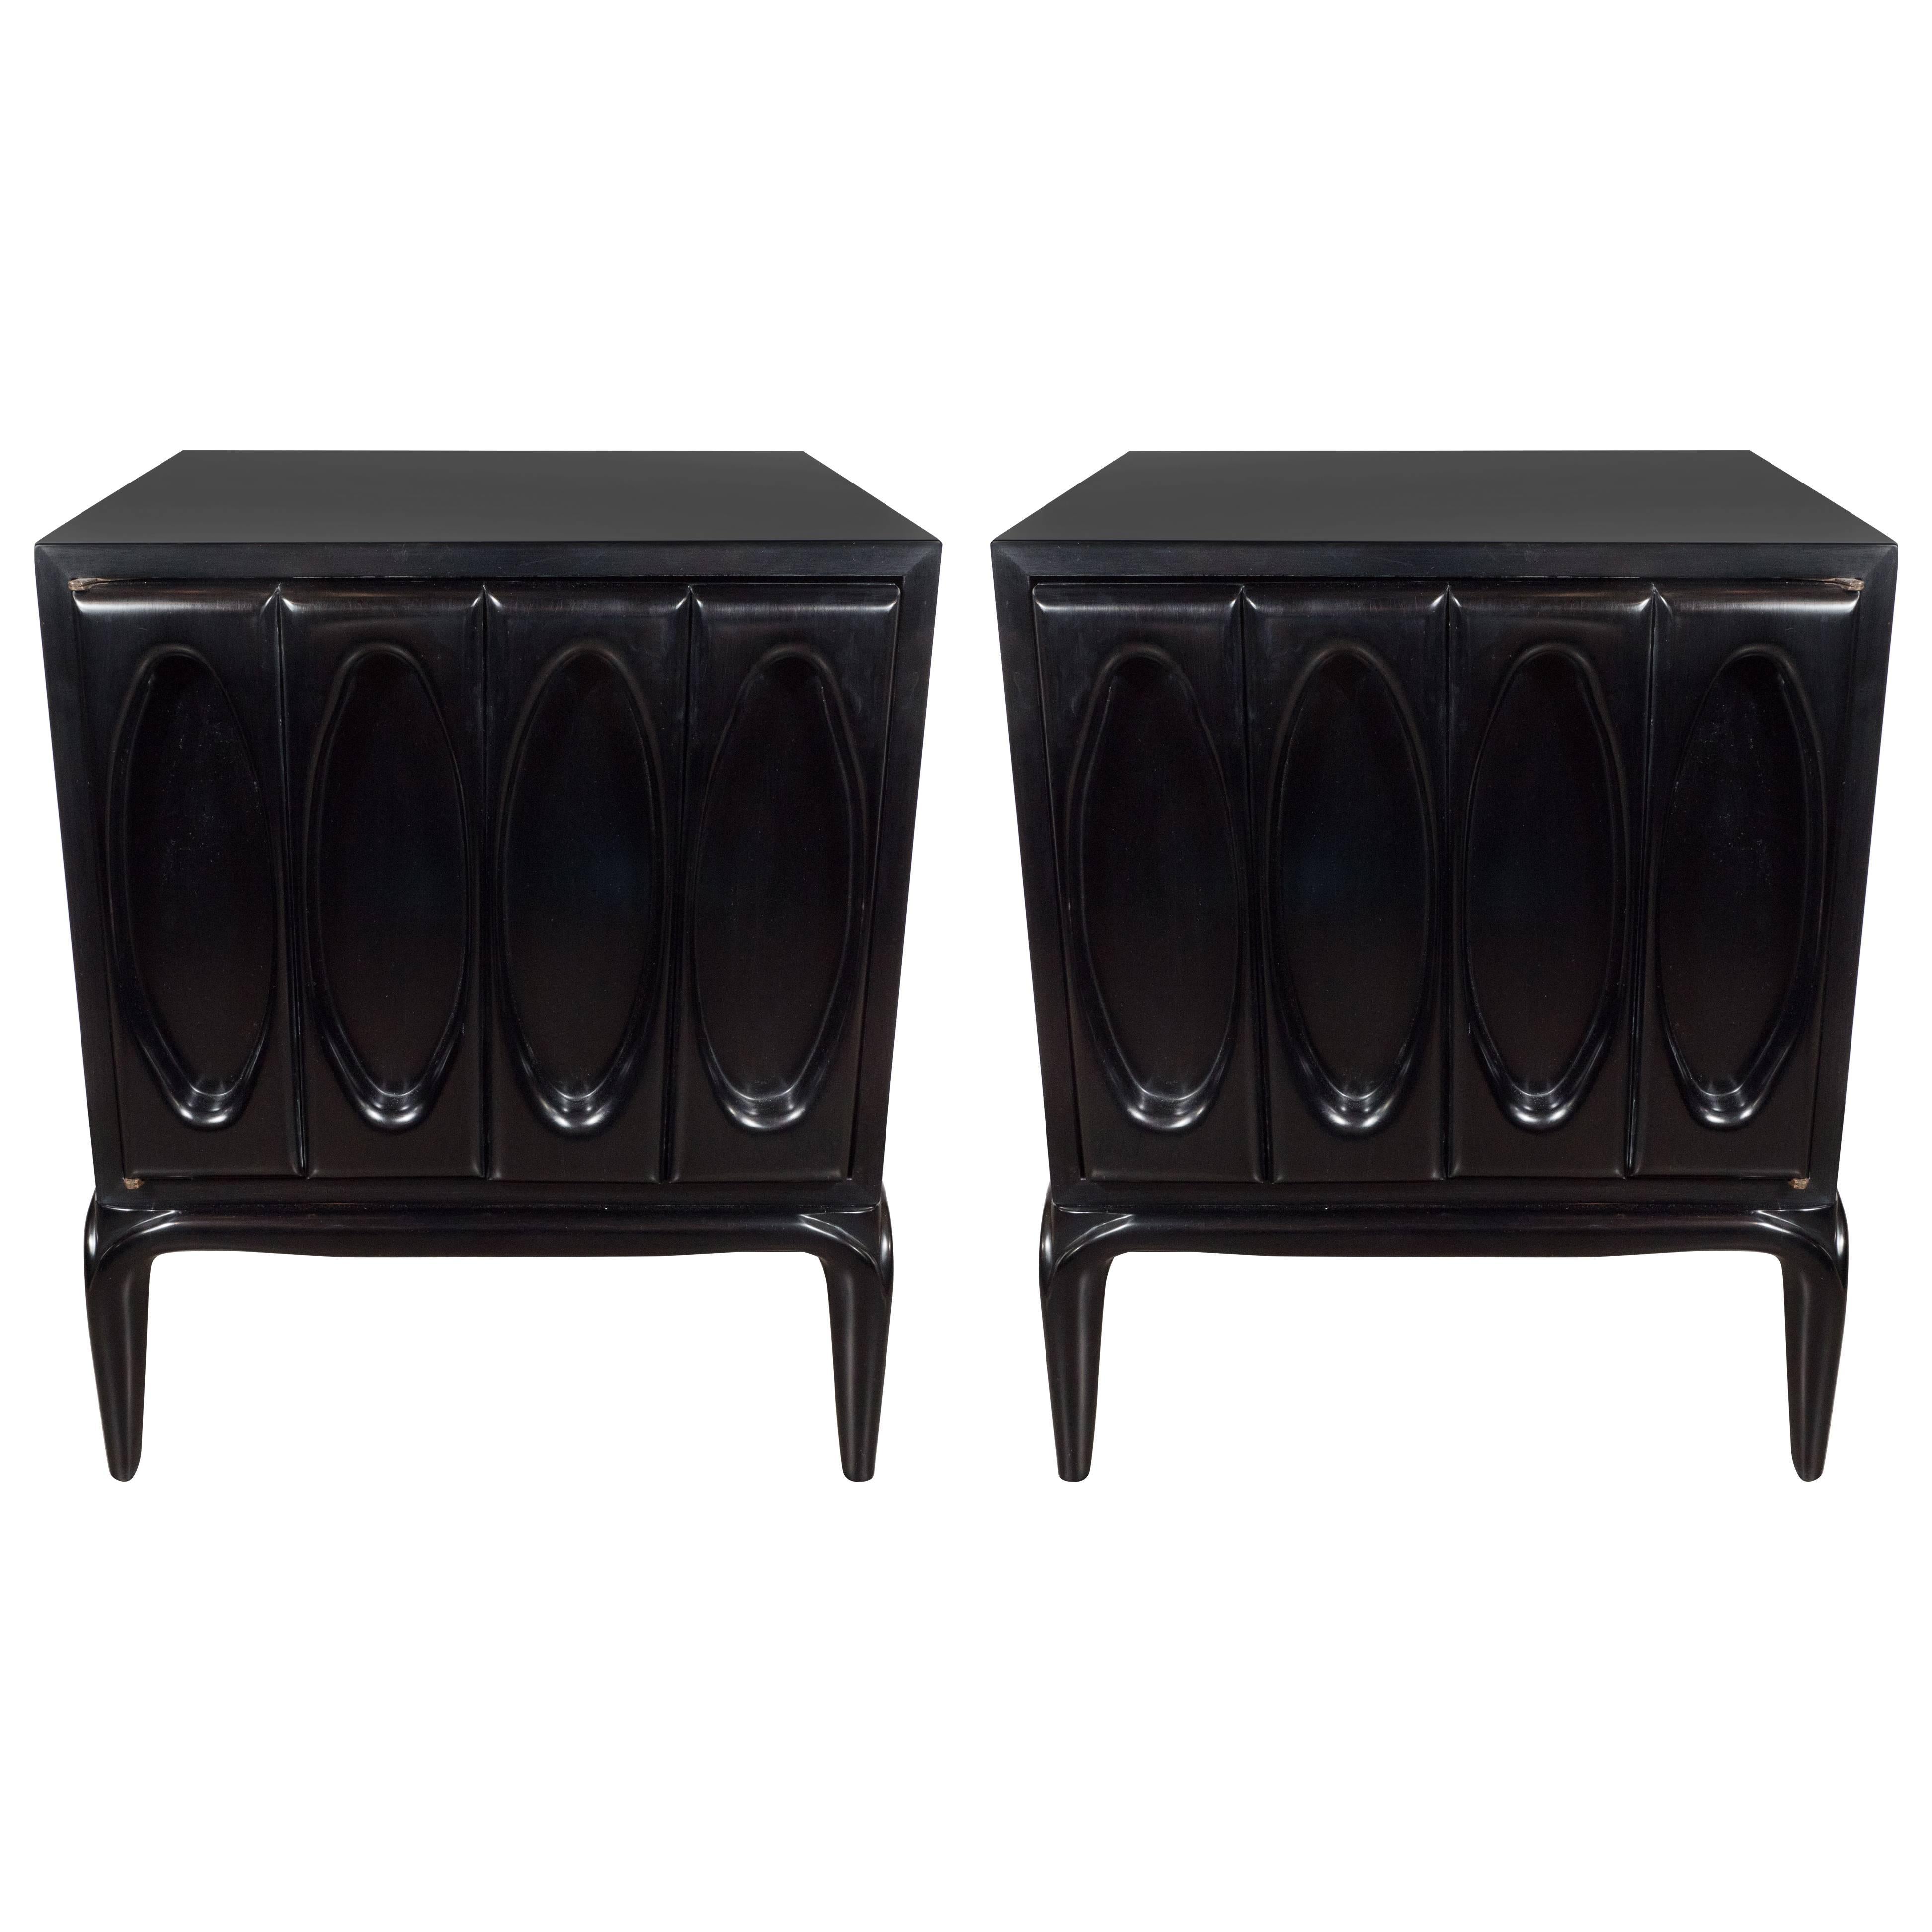 Sculptural Pair of Walnut Nightstands or End Tables with Geometric Details